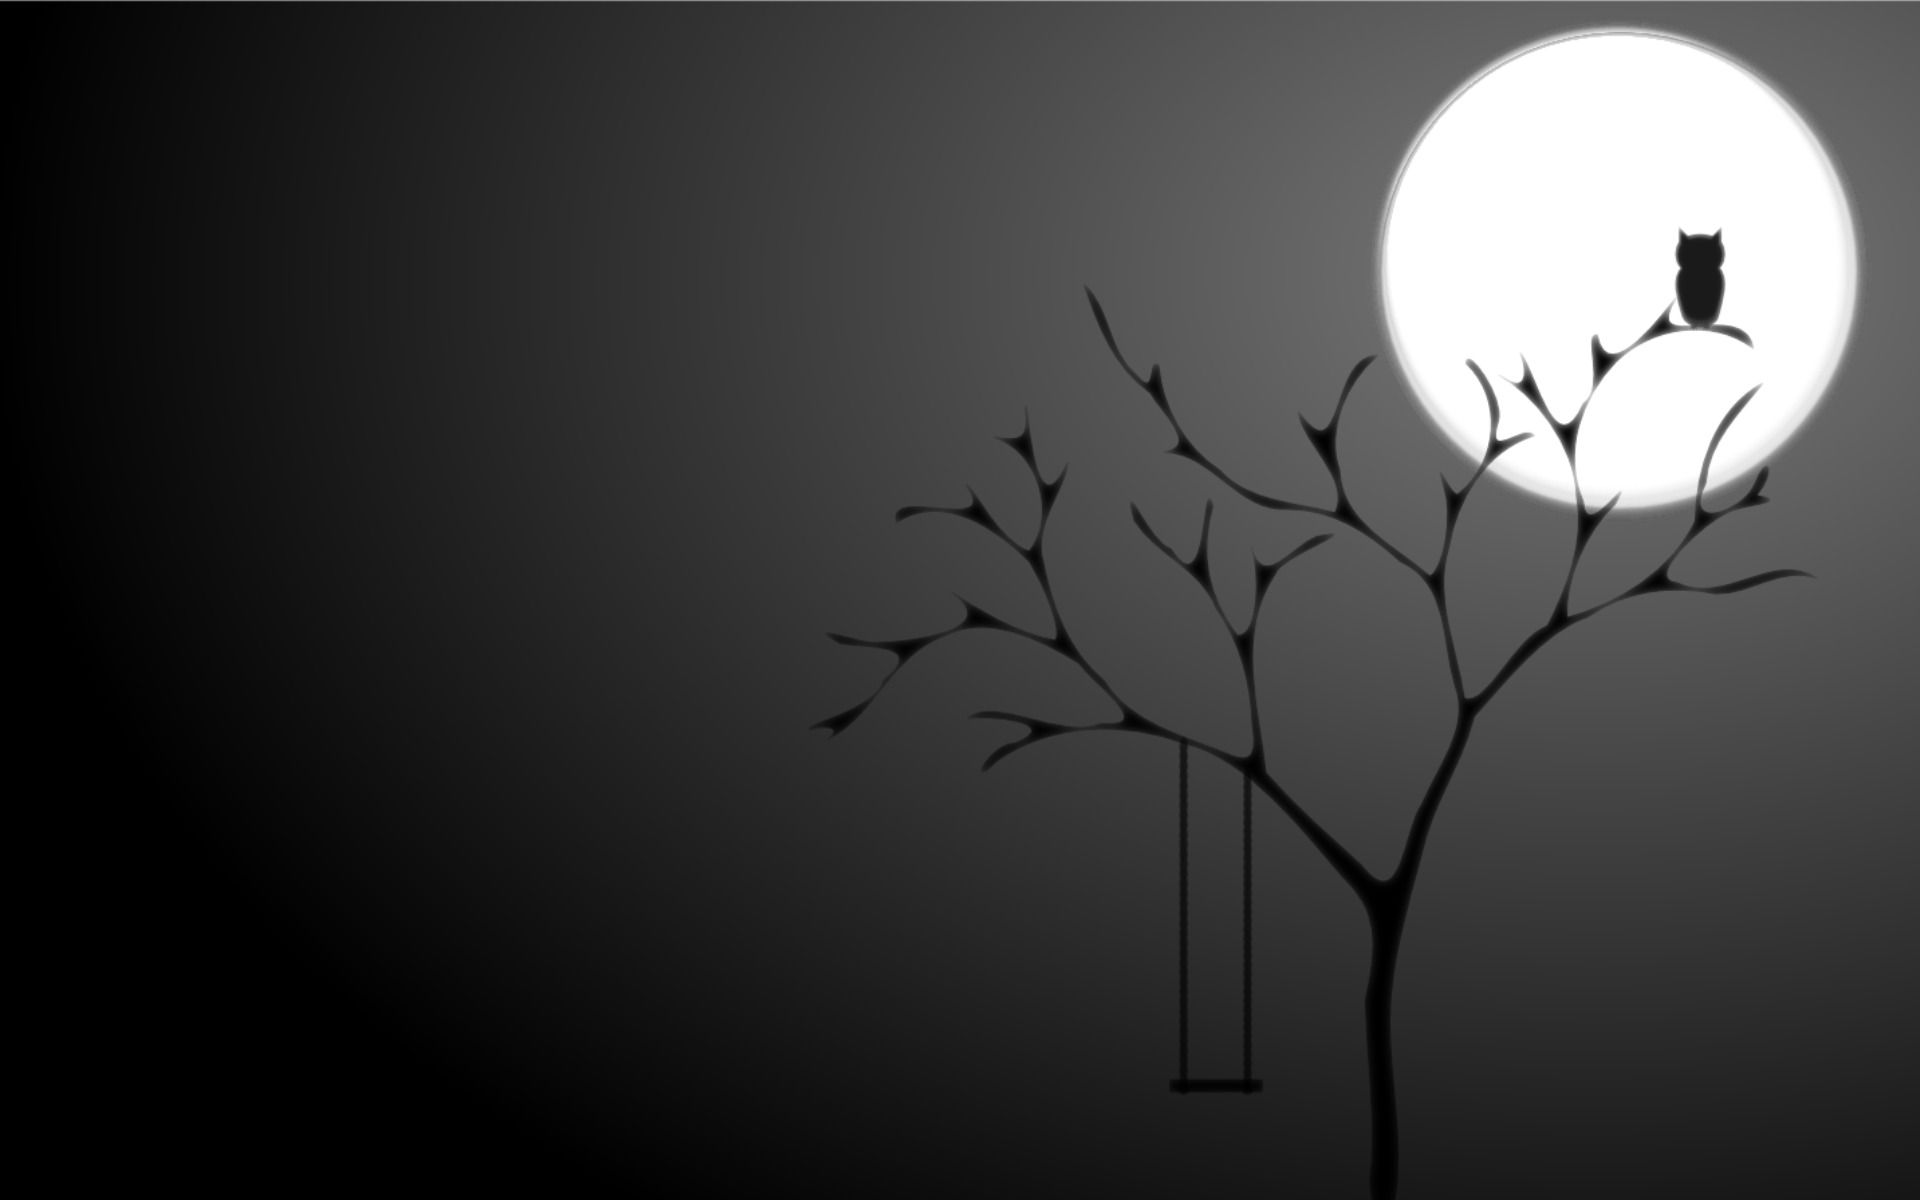 Black And White Moon 13 Wide Wallpaper.com